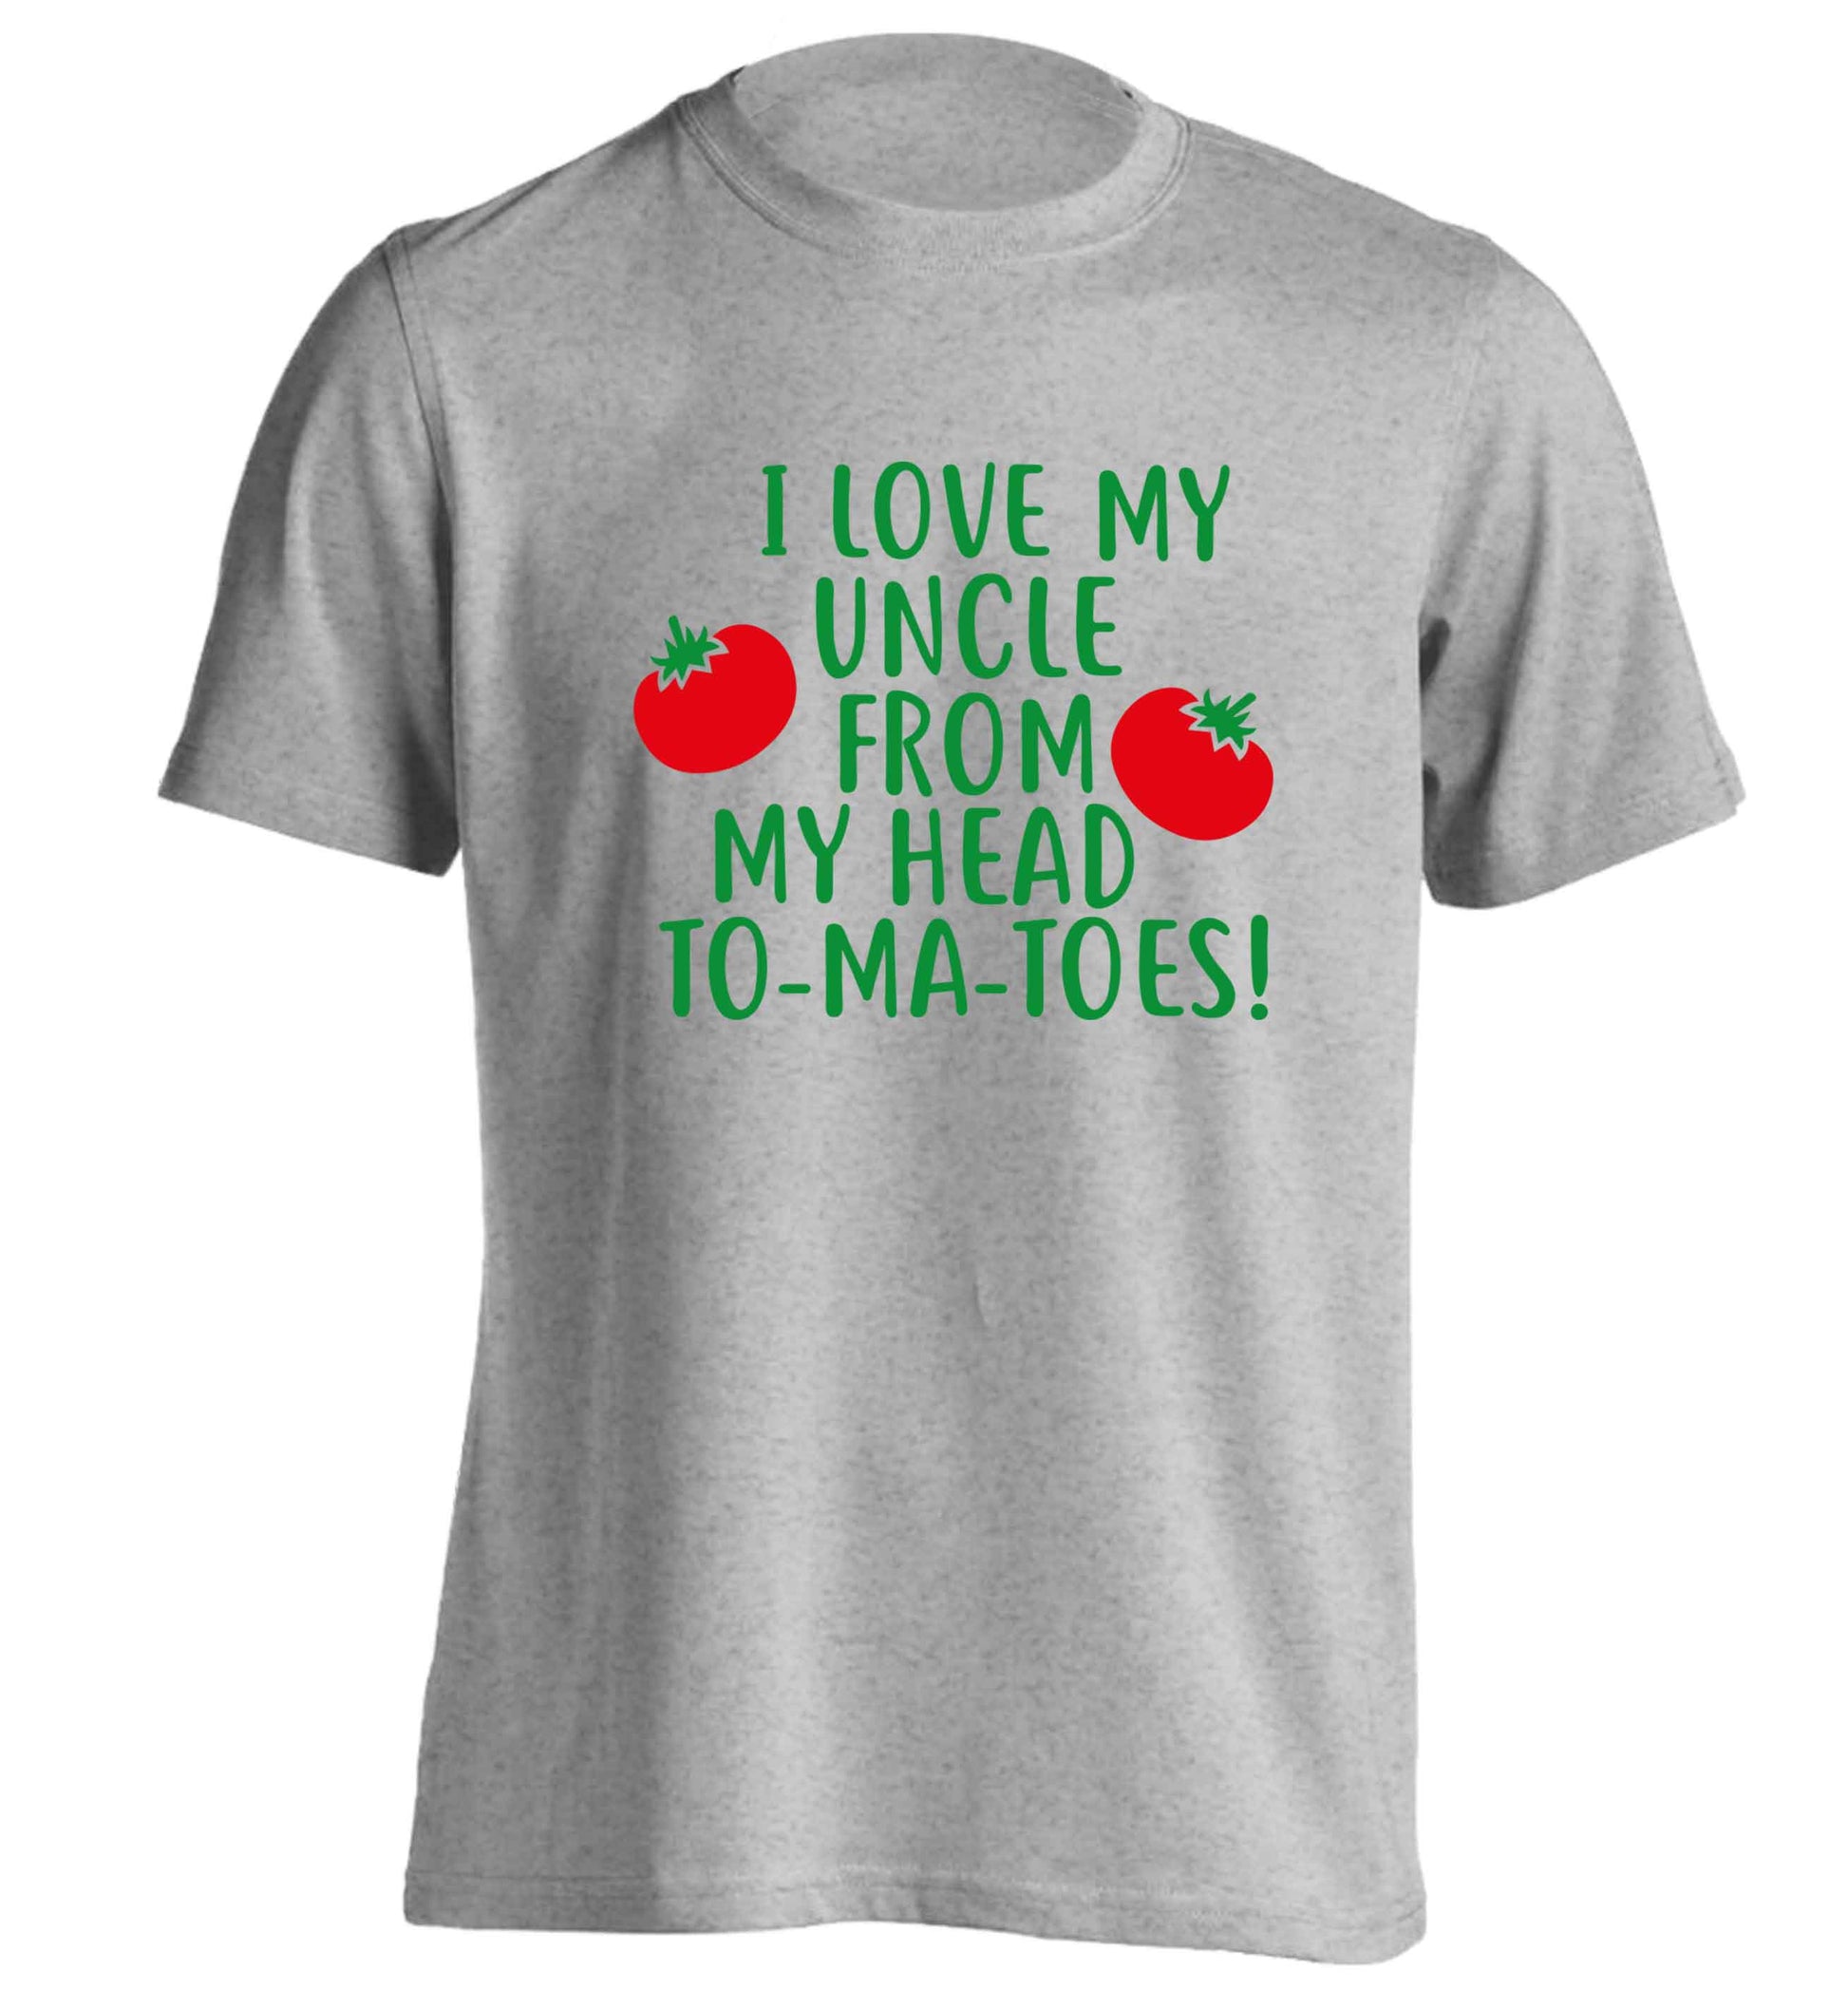 I love my uncle from my head To-Ma-Toes adults unisex grey Tshirt 2XL